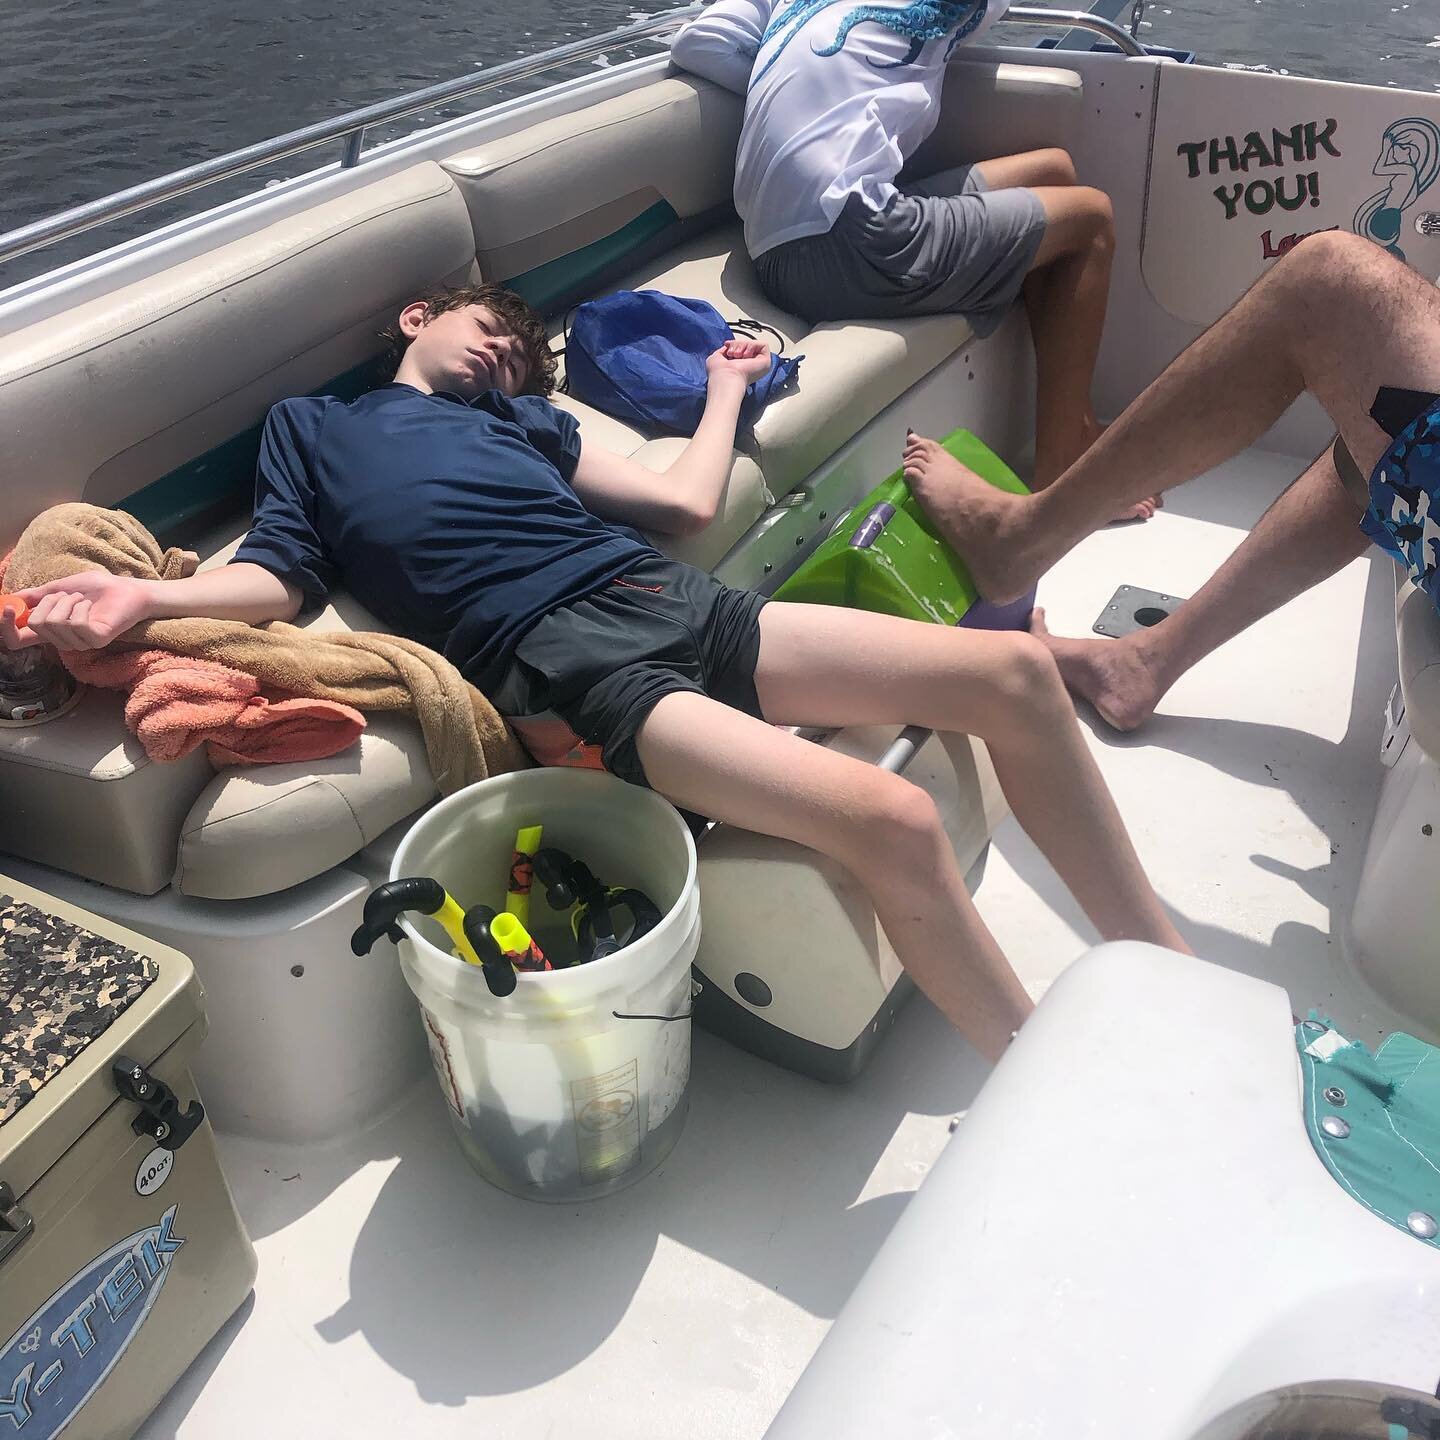 Brothers John (13) and Joe (15) were knocked out after scalloping this morning. #myneckhurts #bayscallops #homosassa #naturecoast